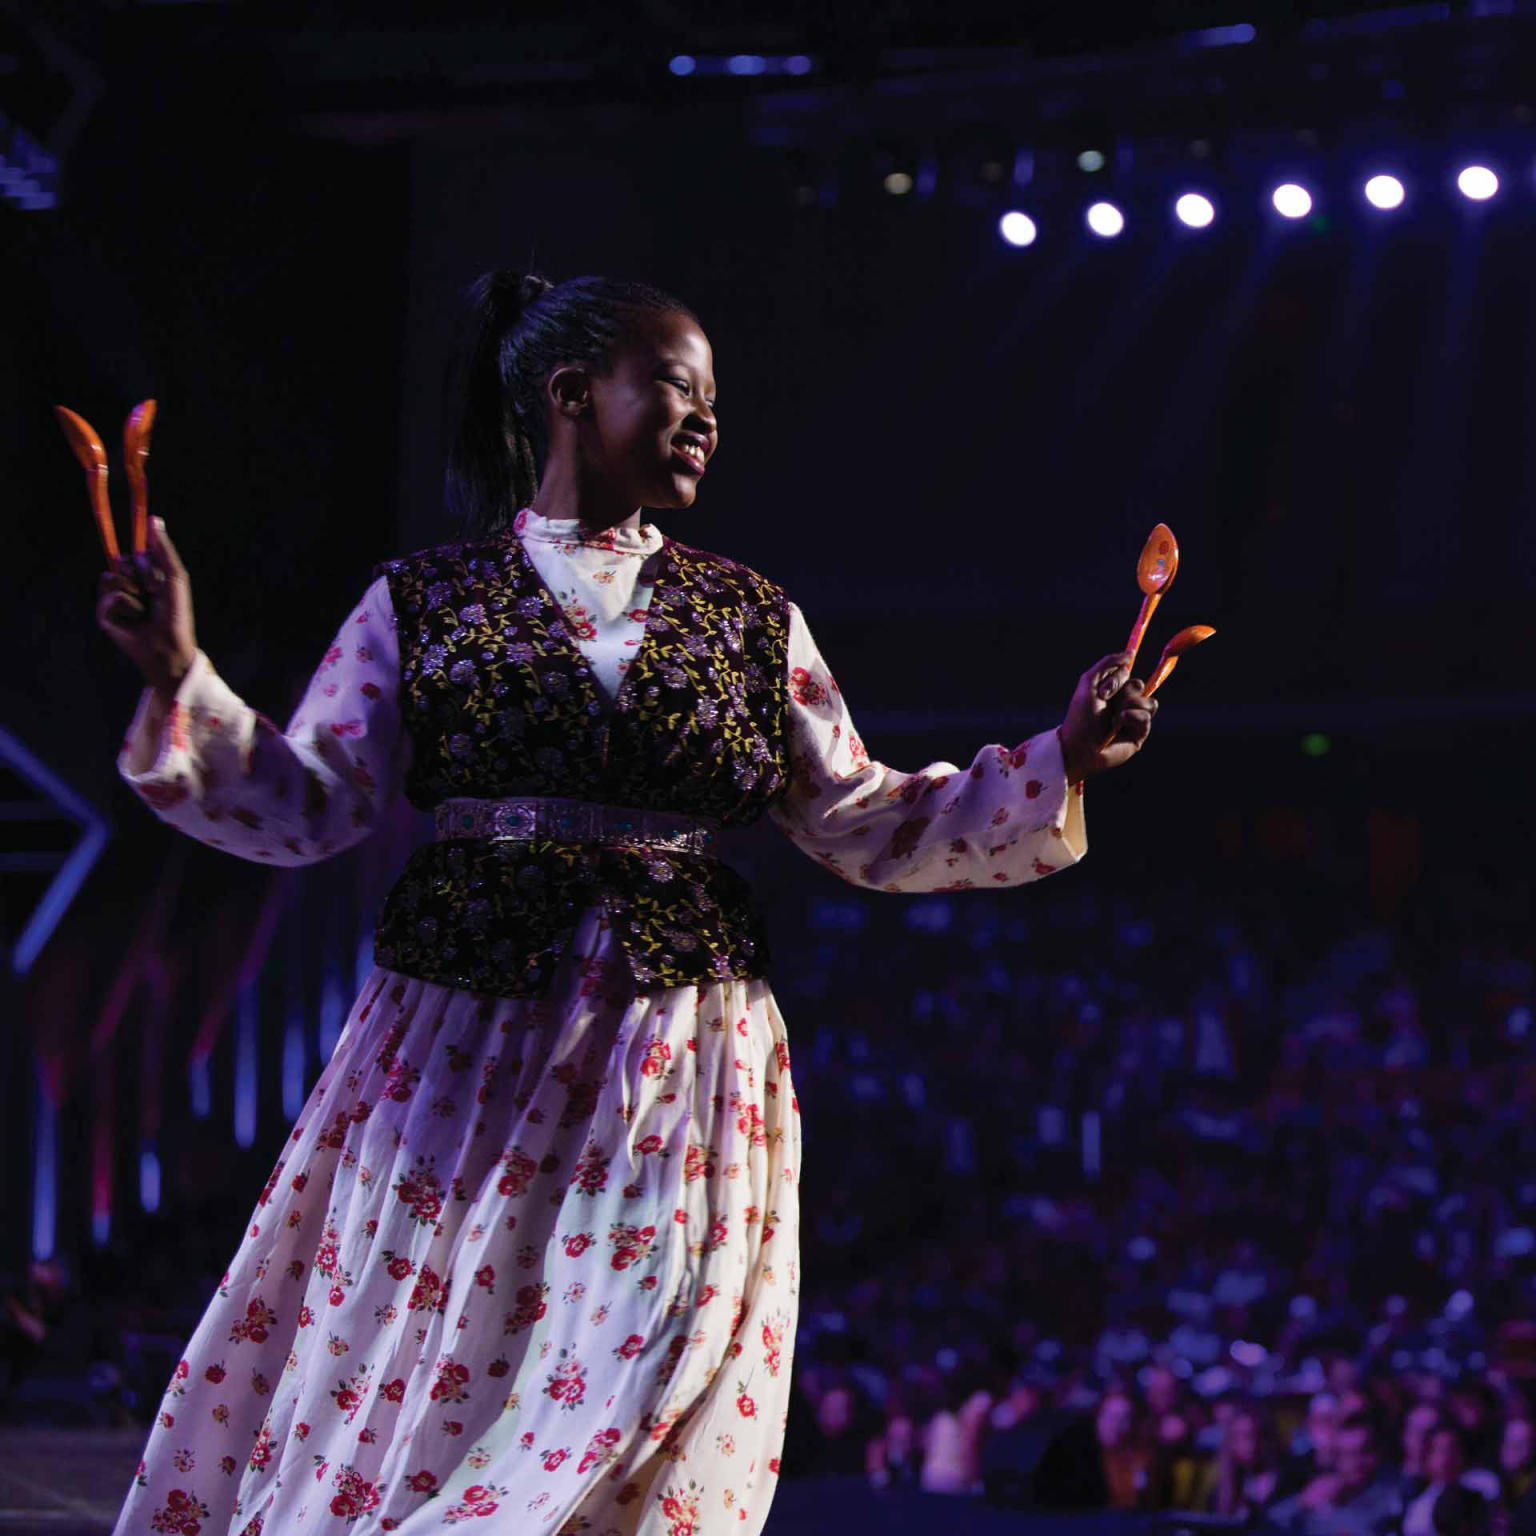 Woman in a floral dress on stage dancing with her hands up in the air. 